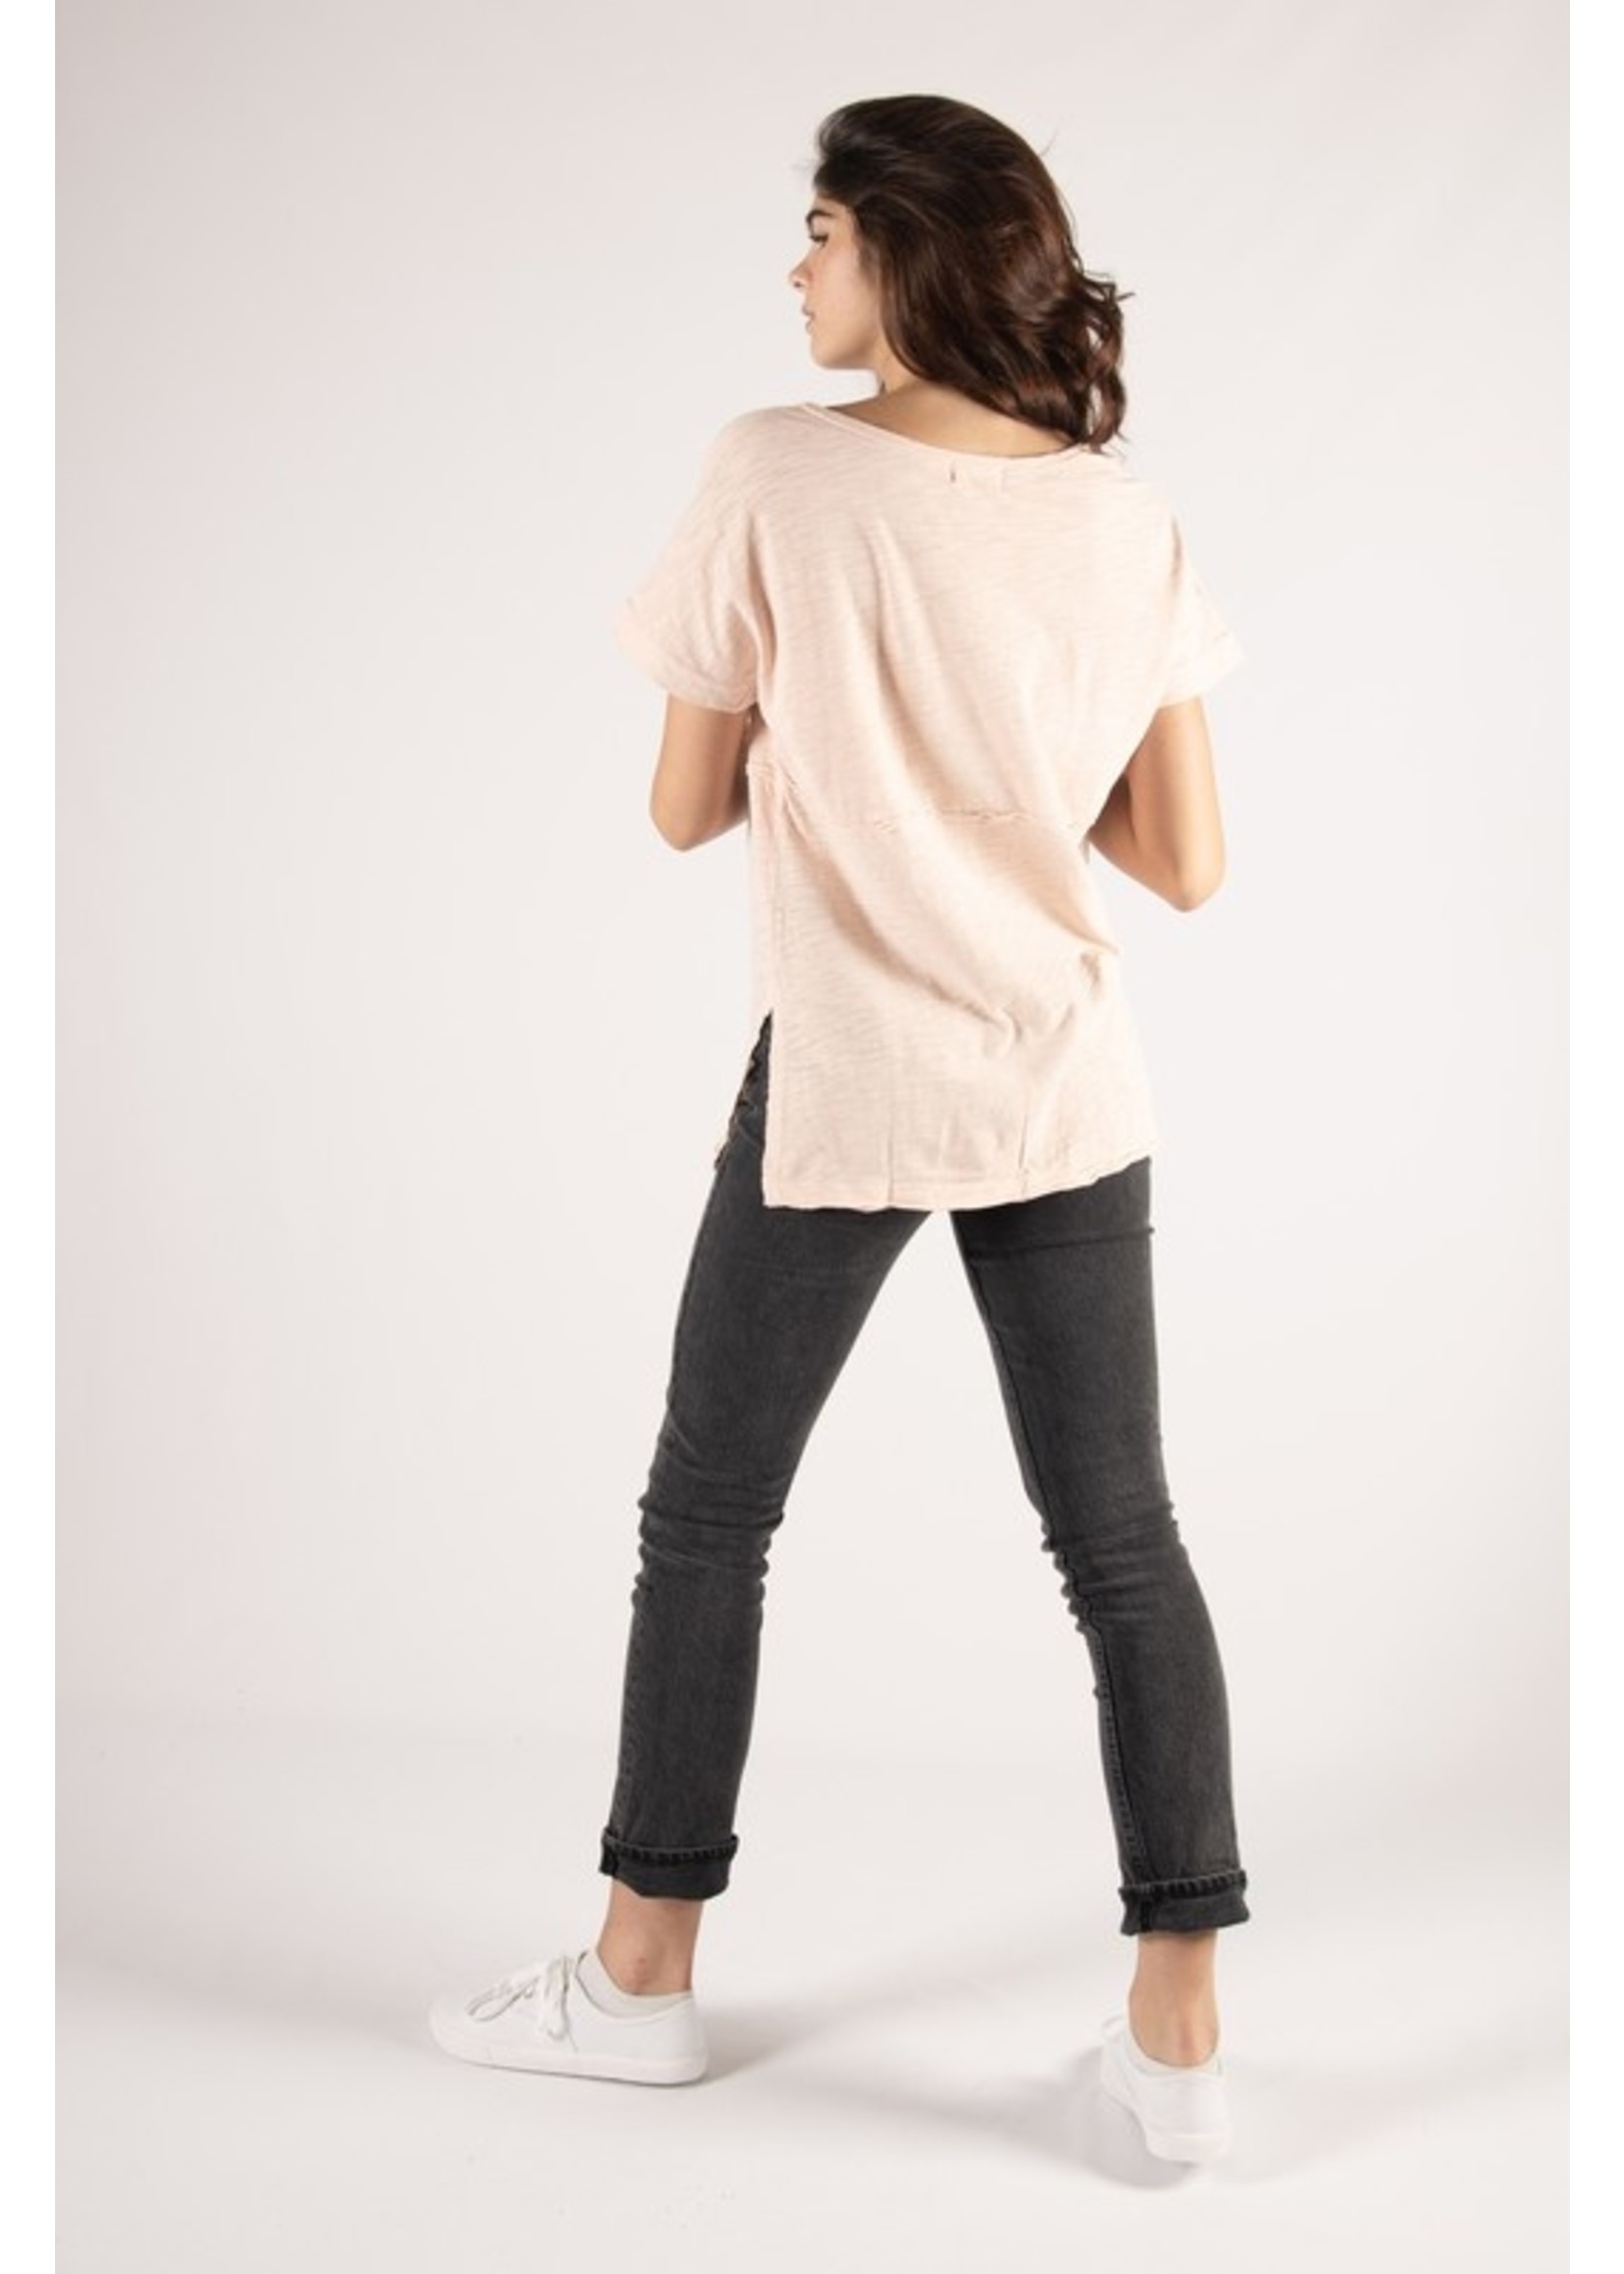 Before You Collection Cotton Slub V Neck SS Tee - T10568